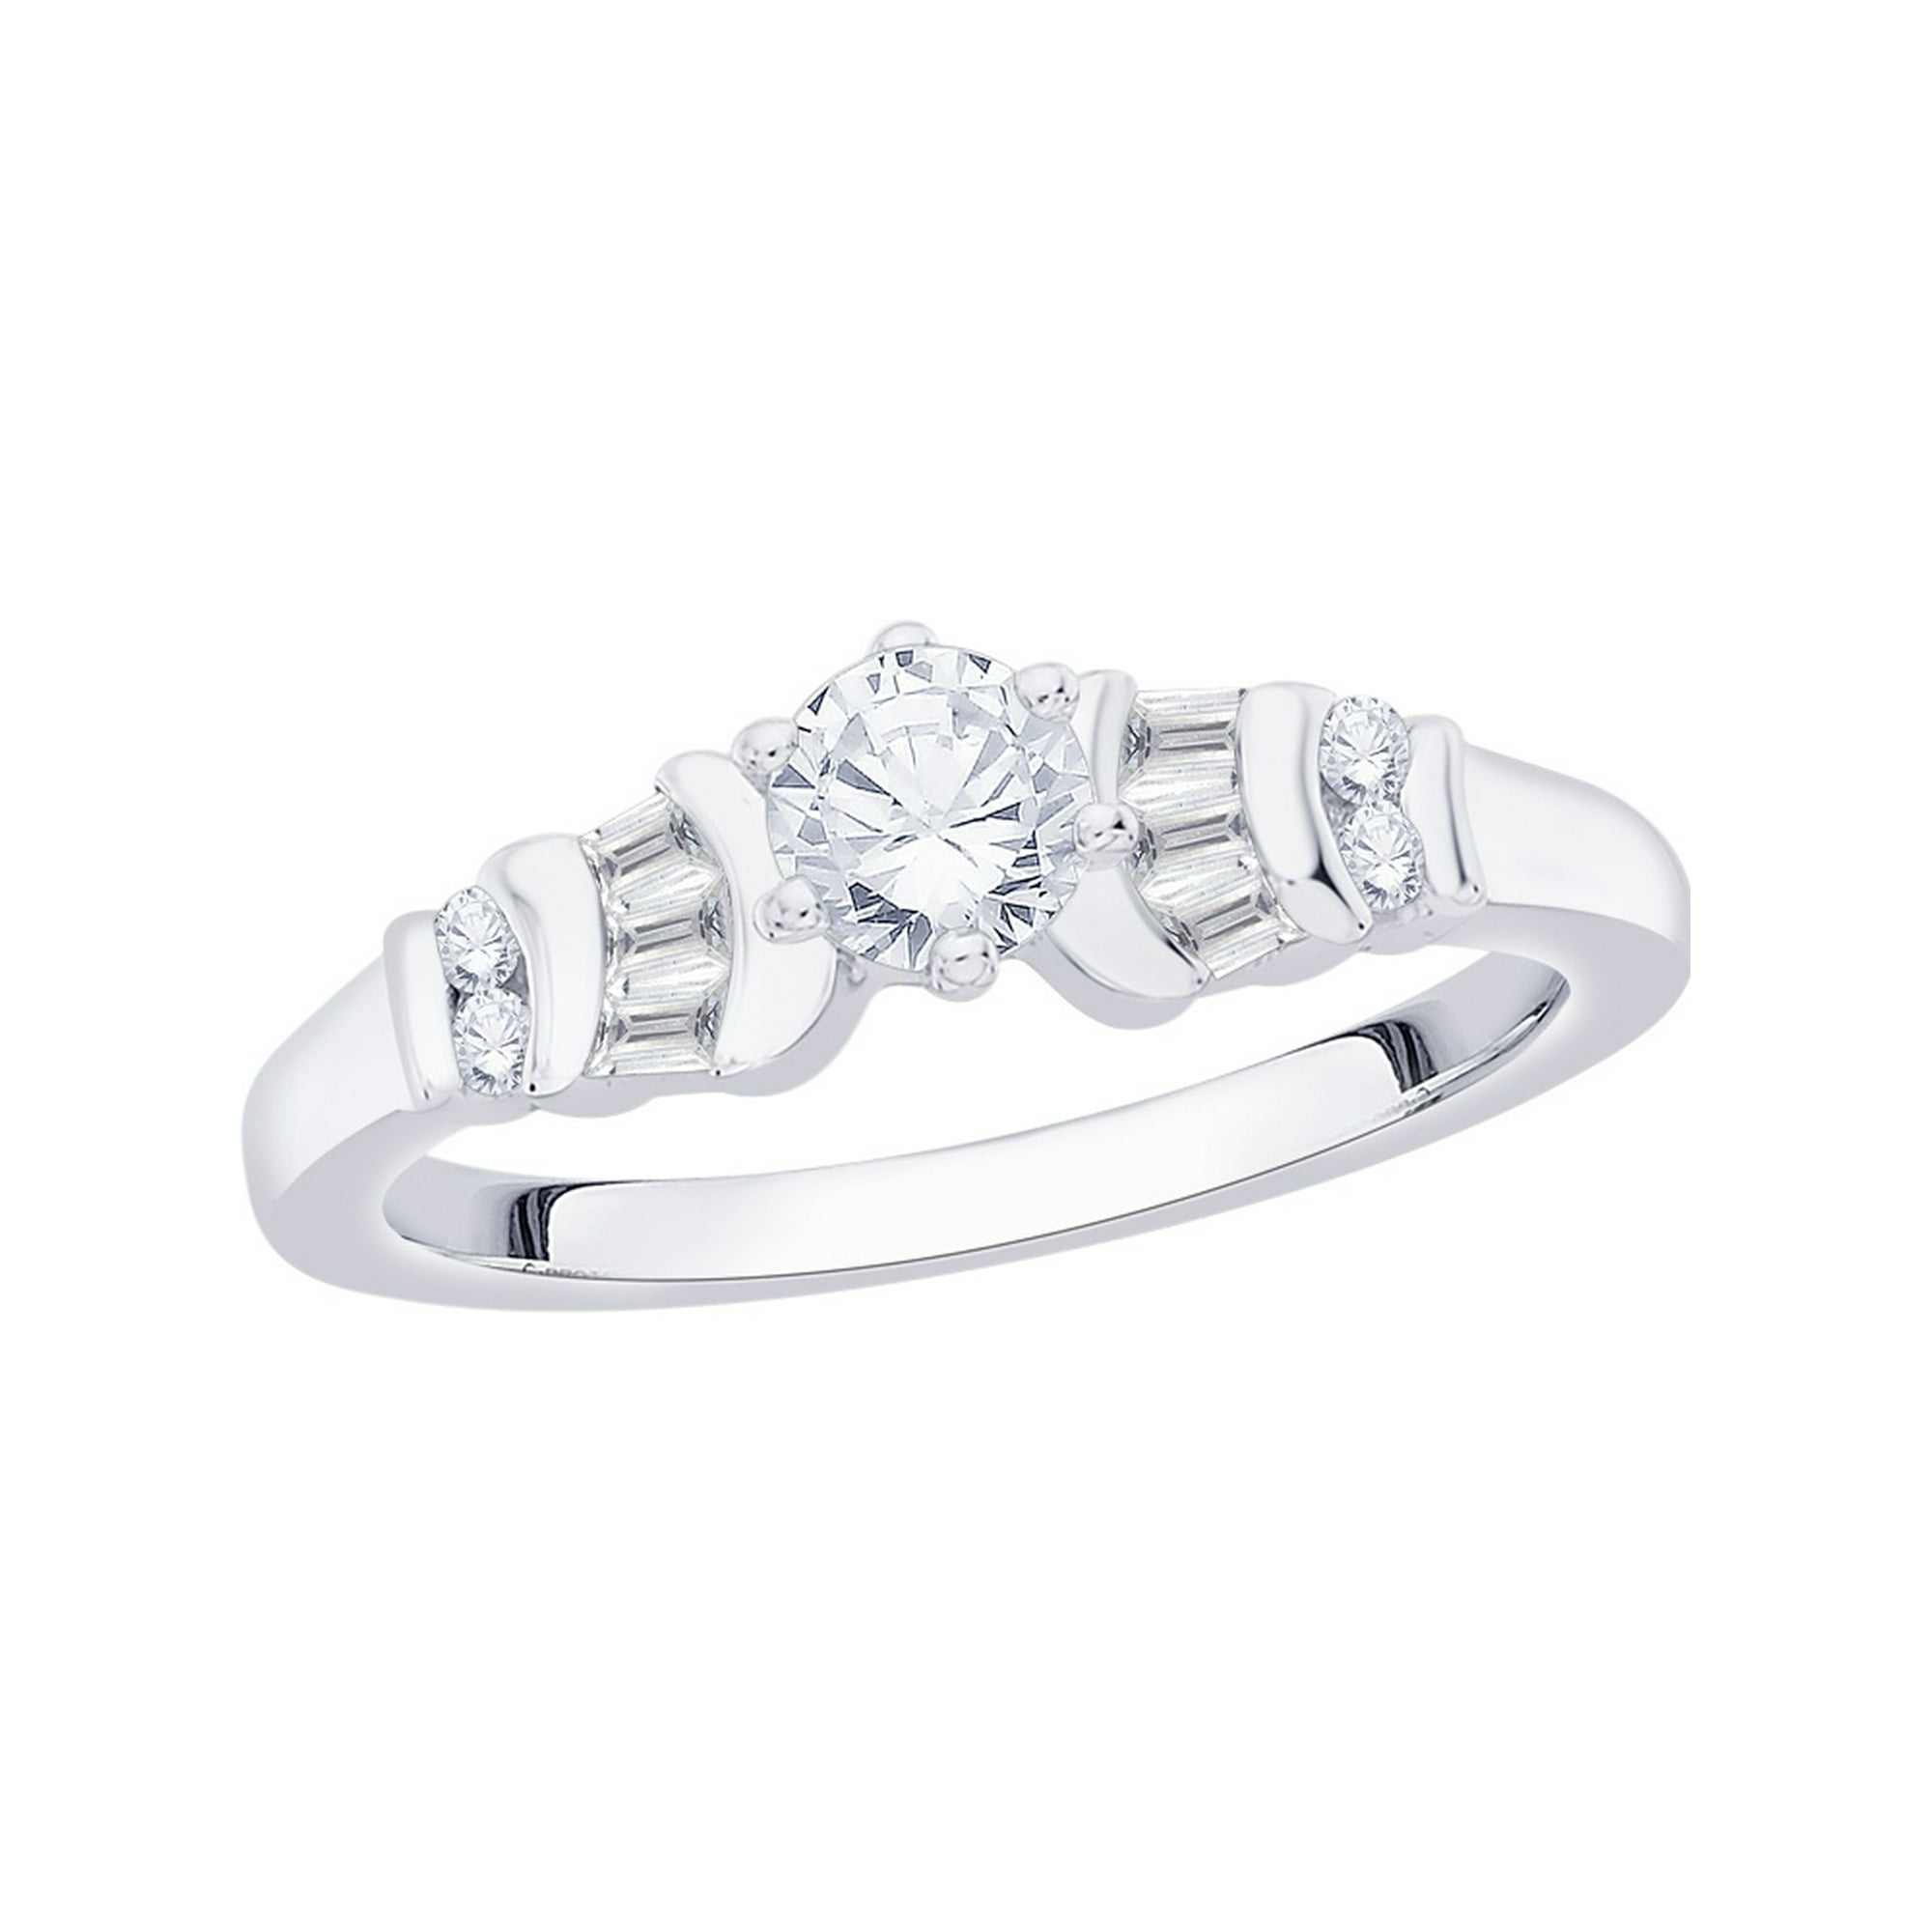 Channel Set Round and Baguette Cut Diamond Fashion Ring in 14K White Gold  (3/4 cttw, G-H, I2-I3)